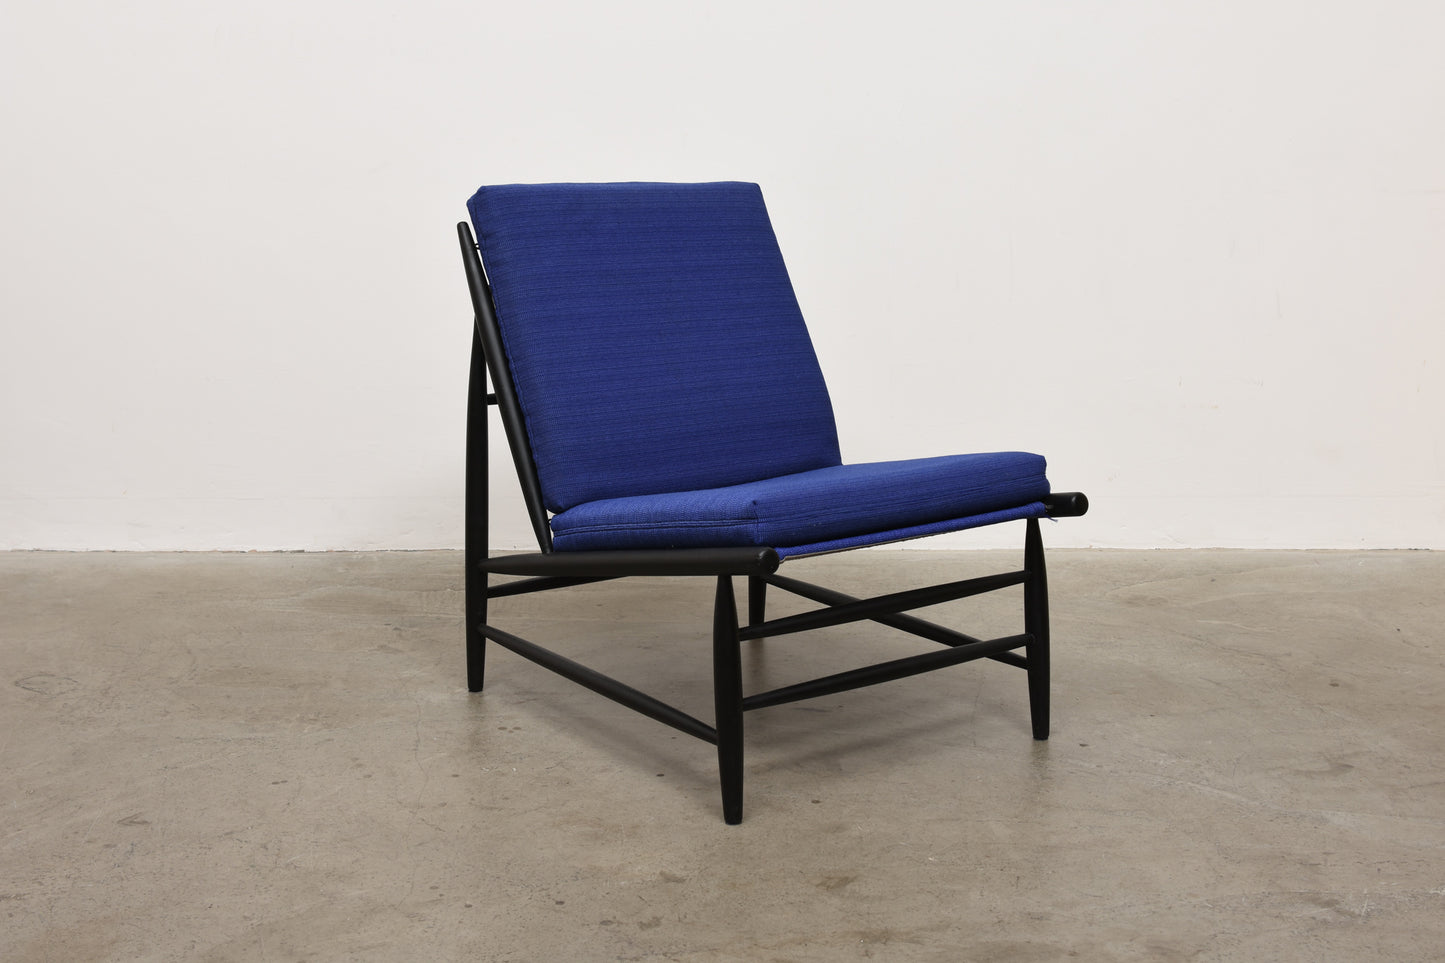 Two available: Lounger by Olli Borg for Asko